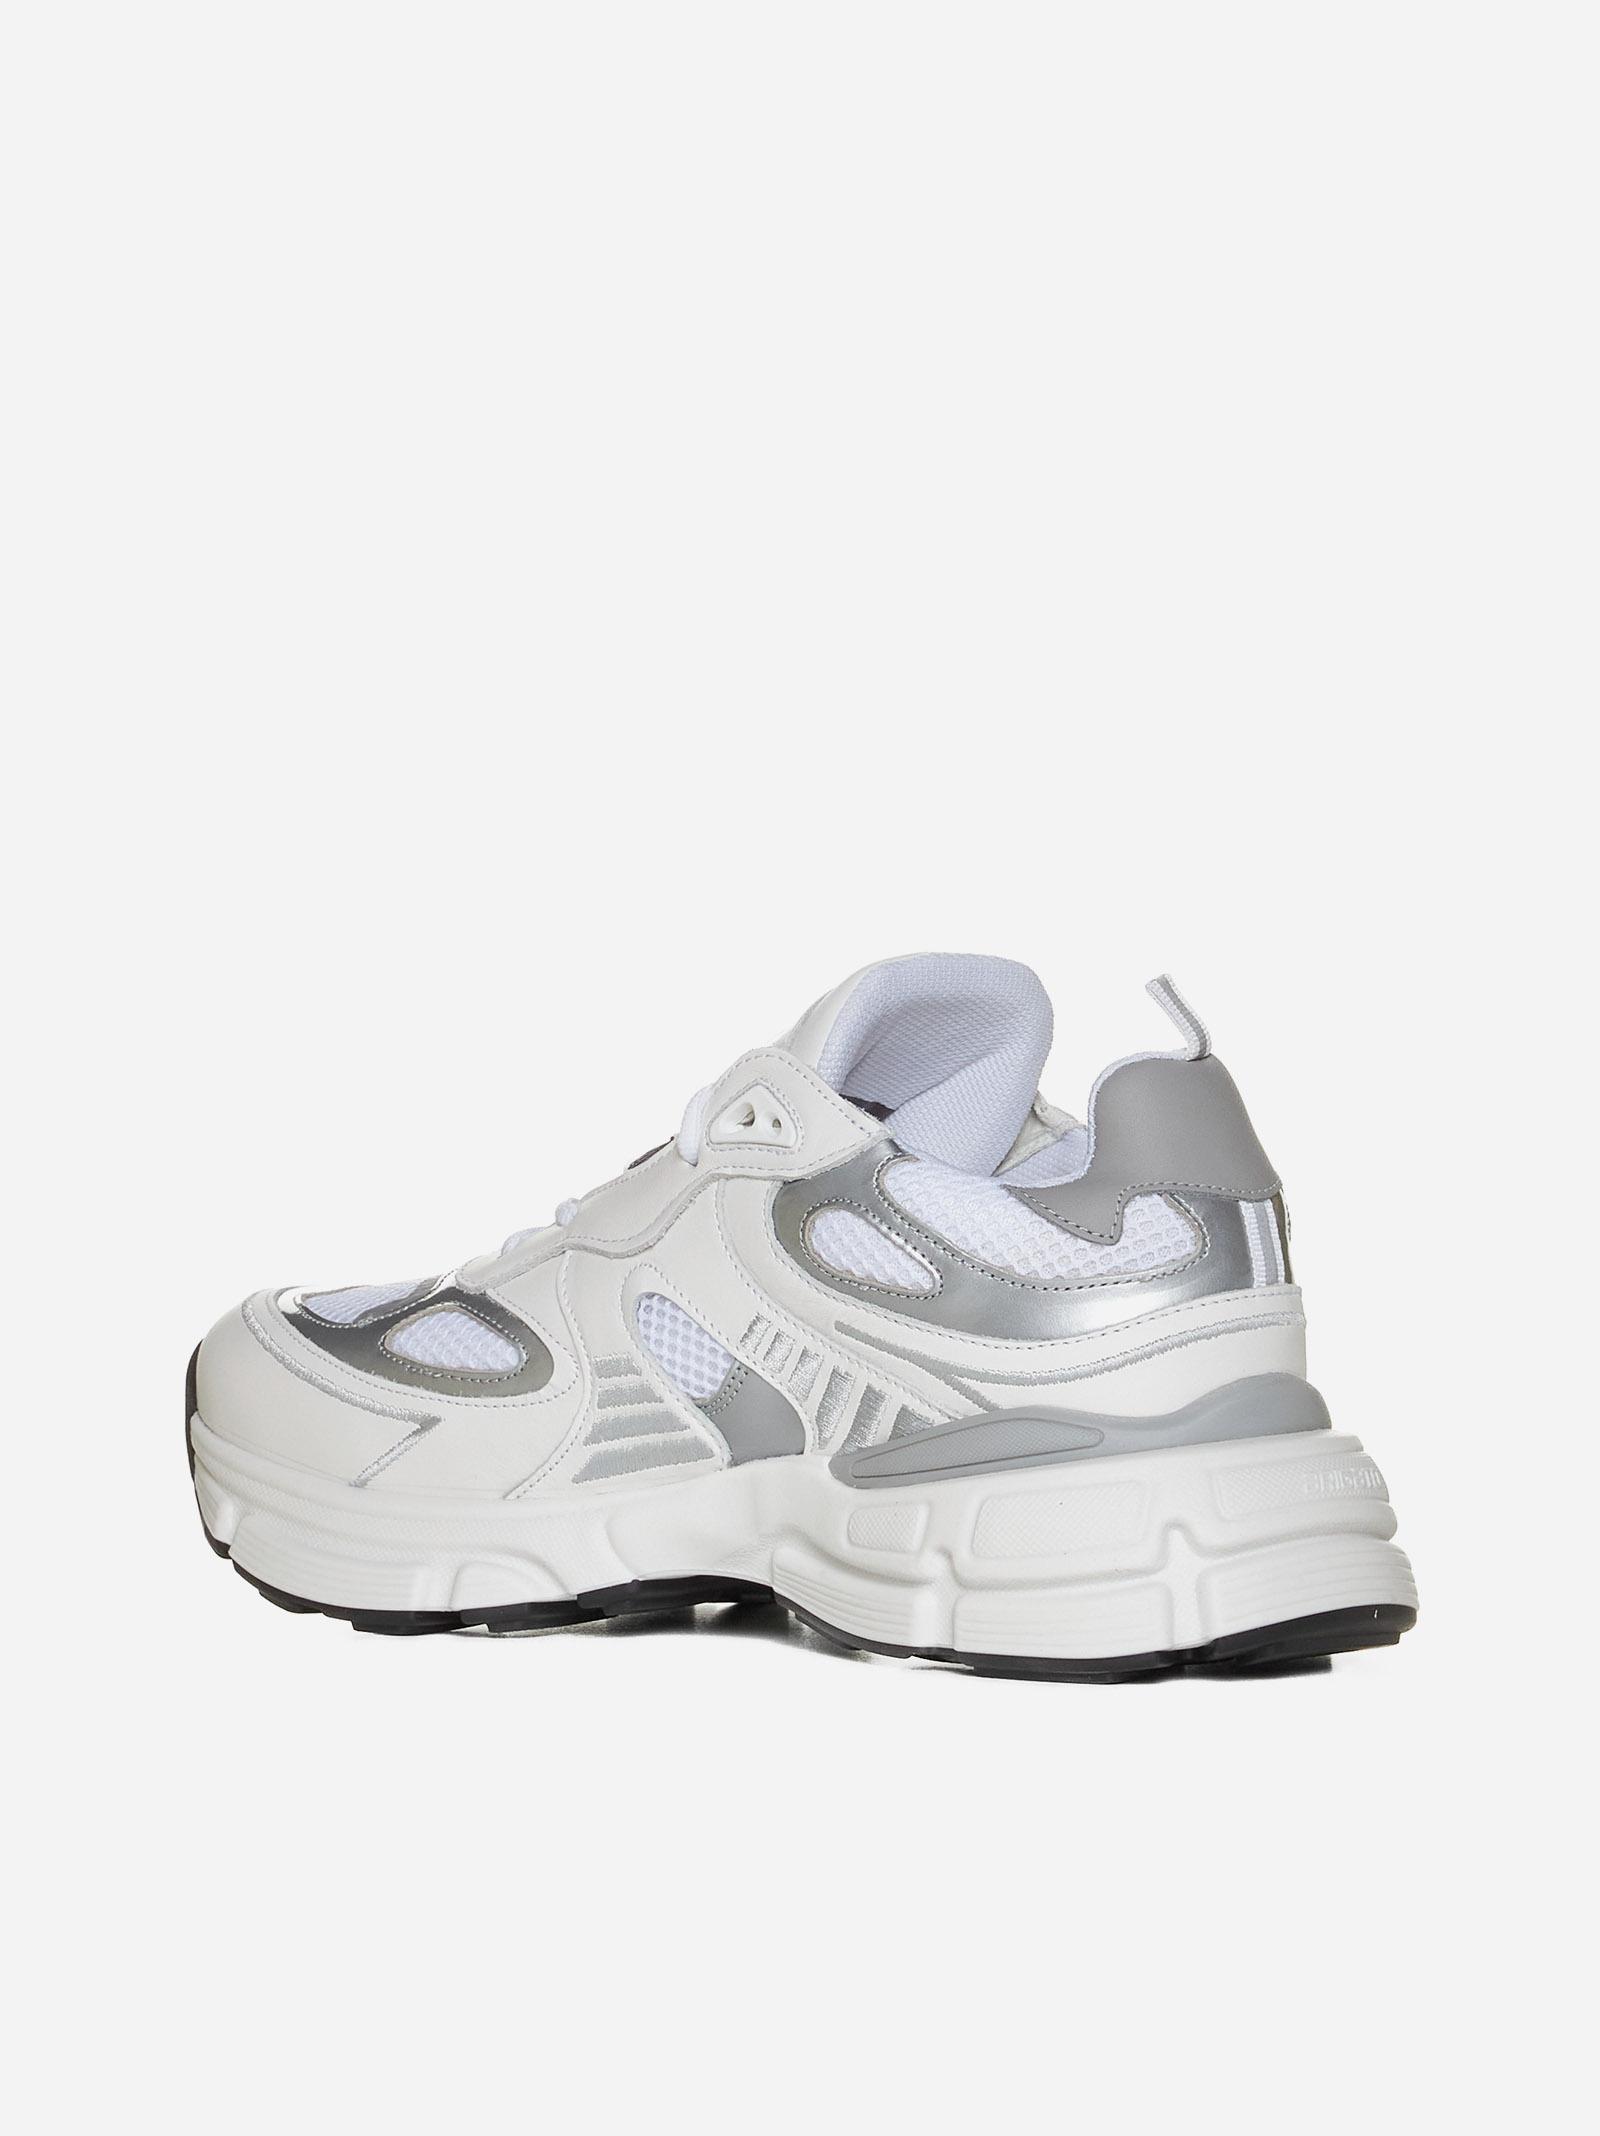 Axel Arigato Marathon Ghost Runner Leather Sneakers in White | Lyst